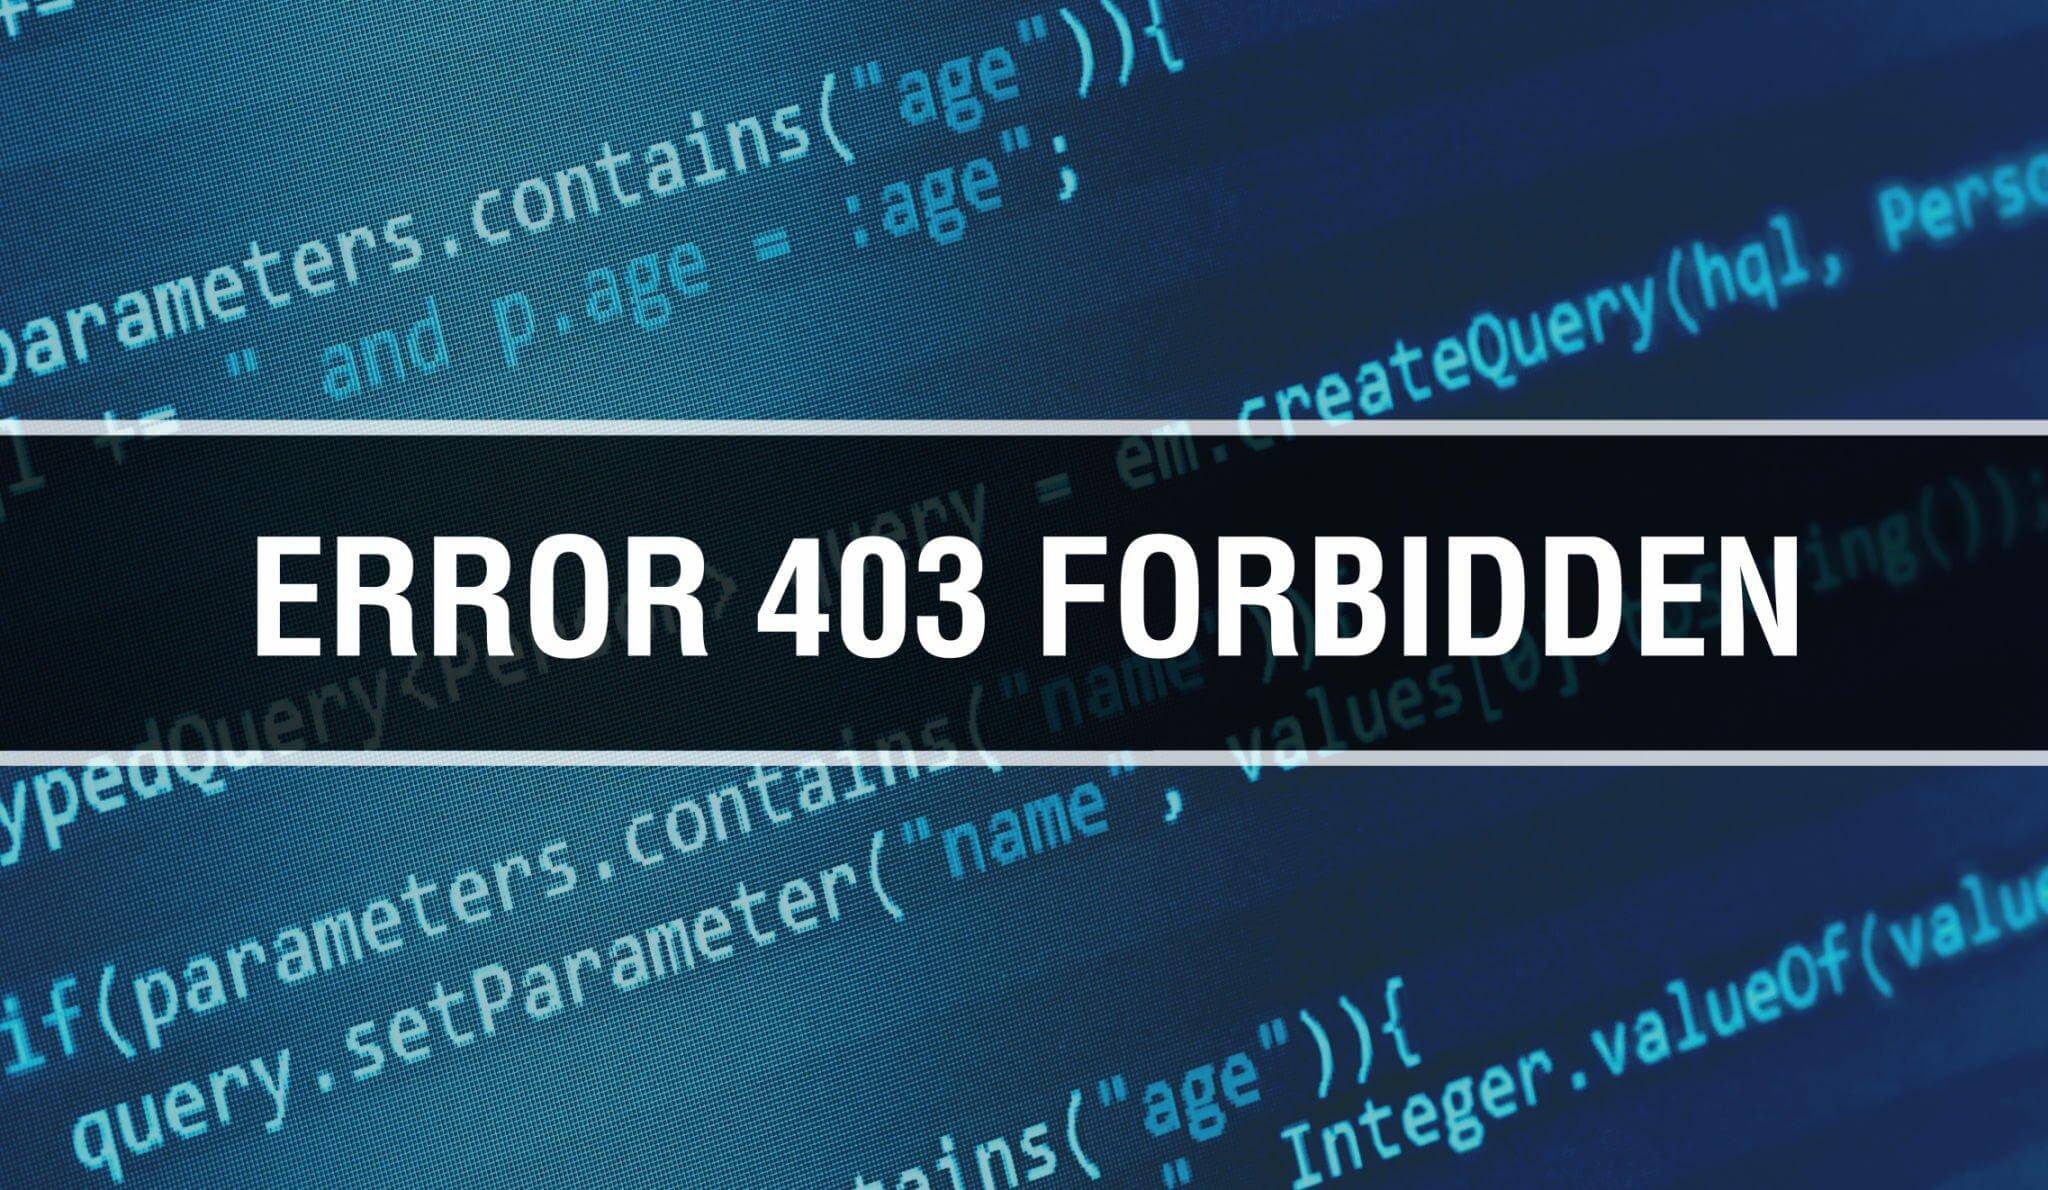 Effortlessly tackle the '403 Forbidden' error with our expert guidance.